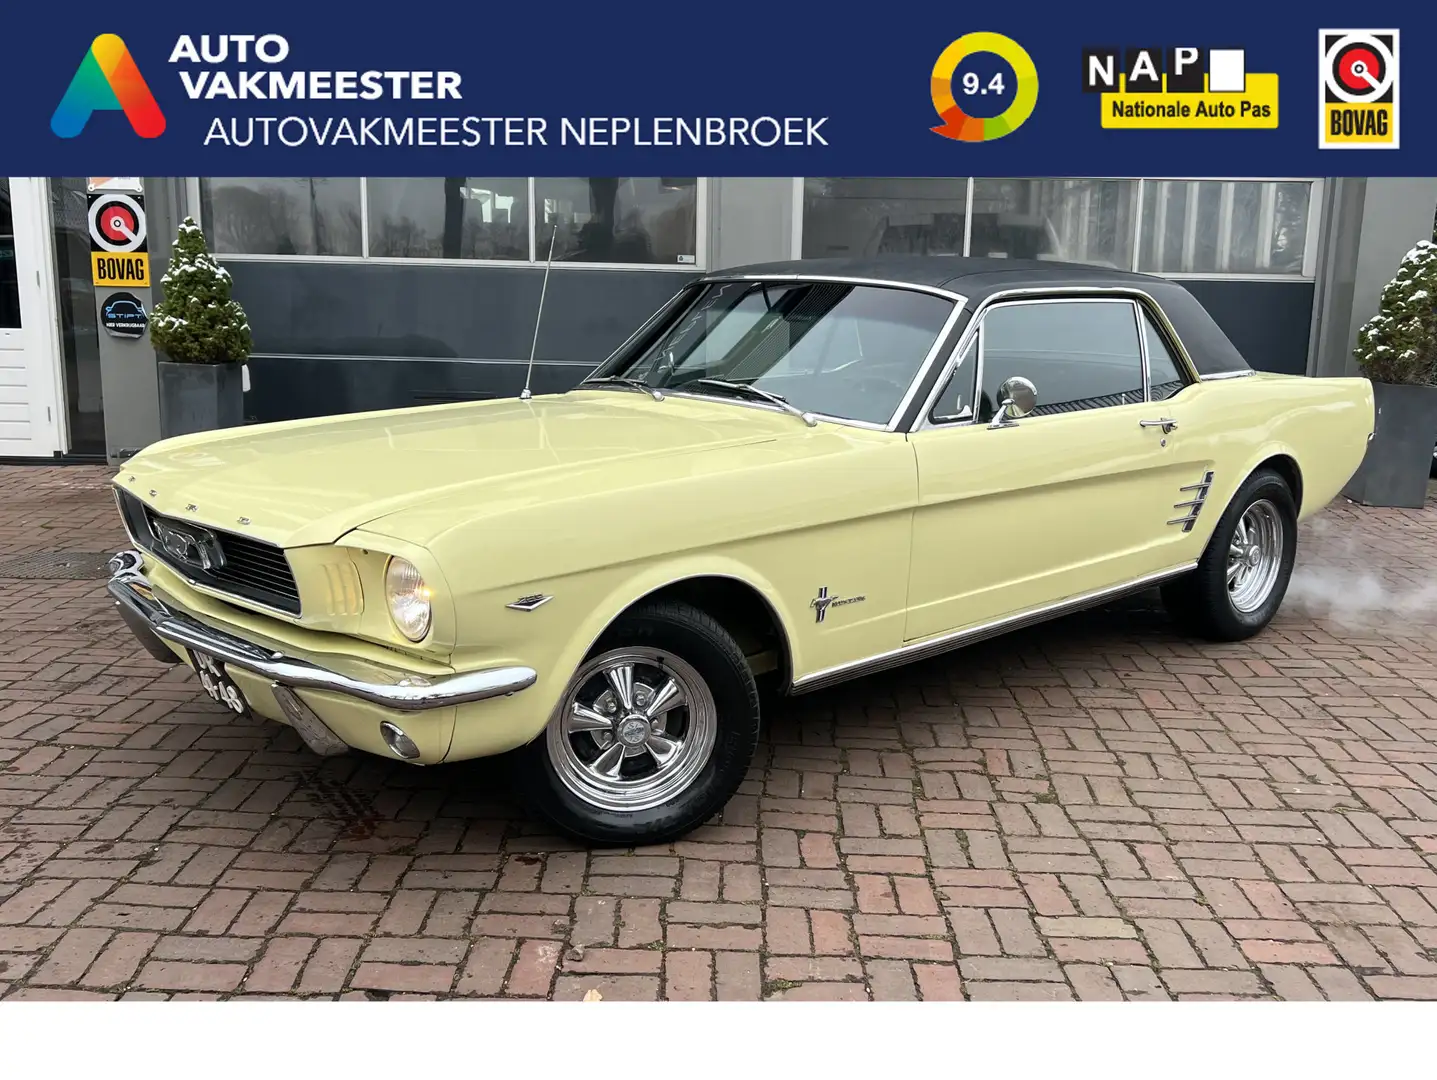 Ford Mustang USA 4.6 V8 LPG GT 289 Bj 1966 TOP STAAT 301PK !! m Beige - 1